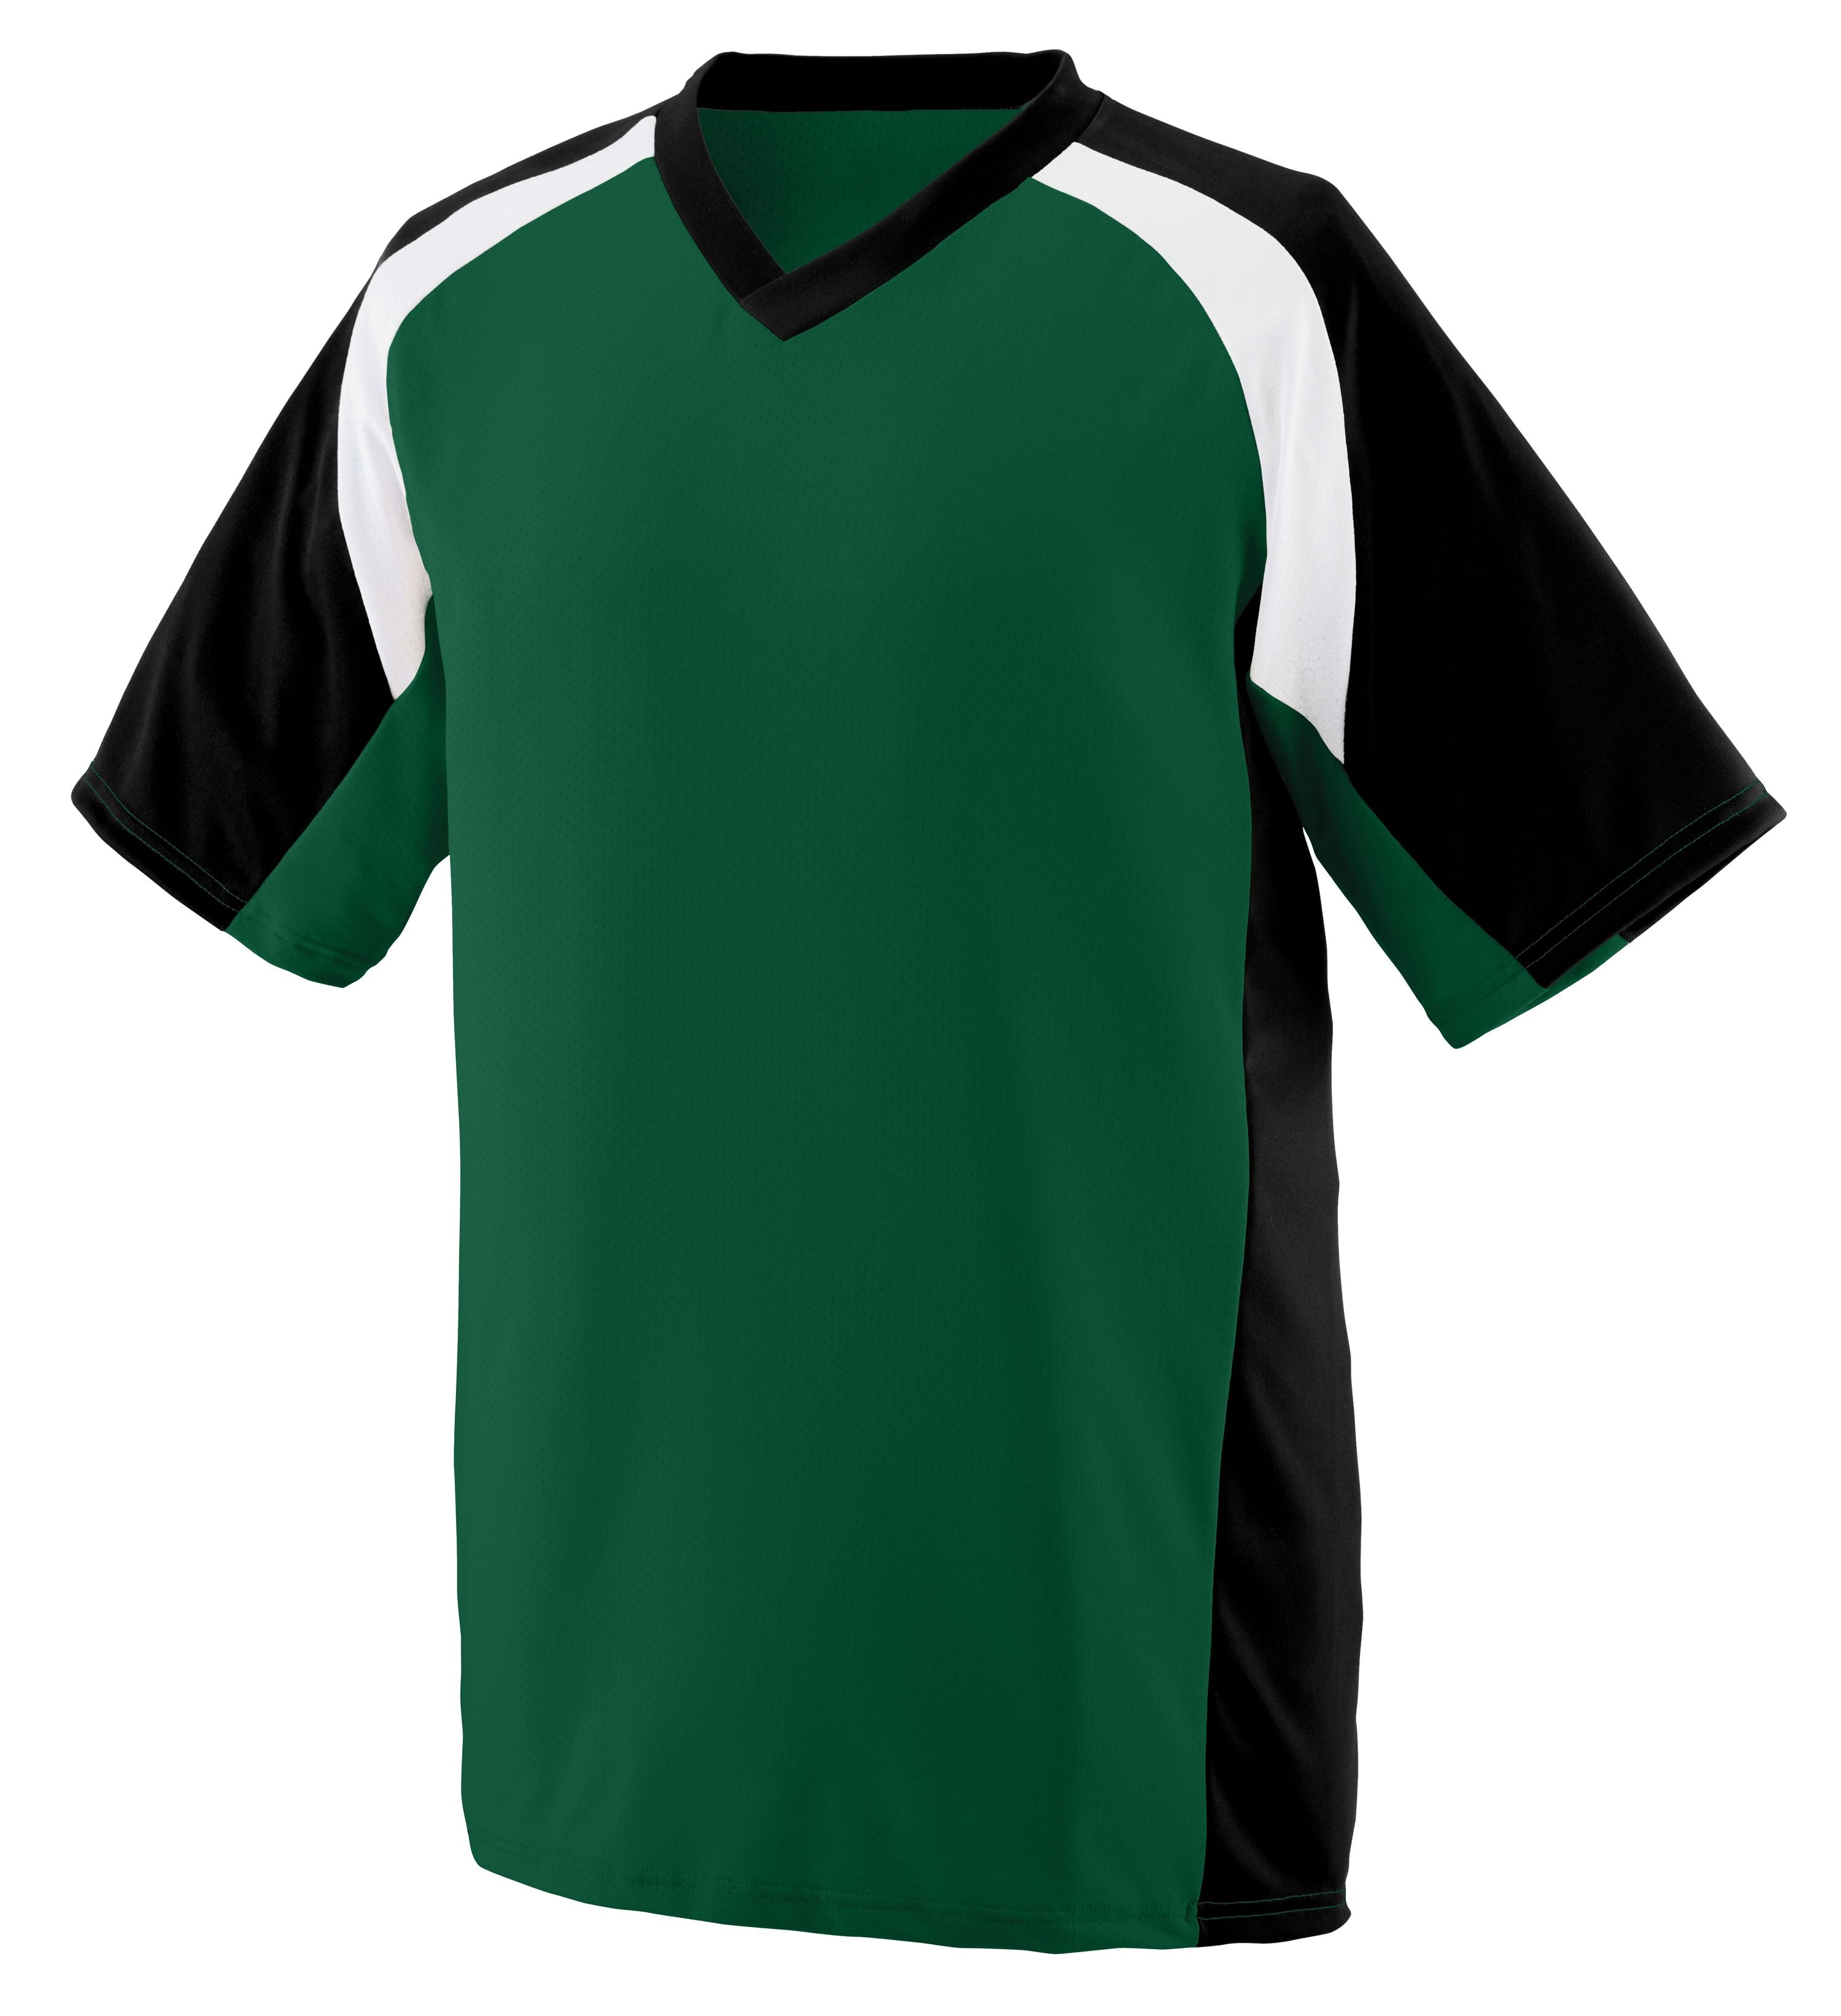 Augusta Sportswear Nitro Jersey in Dark Green/Black/White  -Part of the Adult, Adult-Jersey, Augusta-Products, Football, Shirts, All-Sports, All-Sports-1 product lines at KanaleyCreations.com